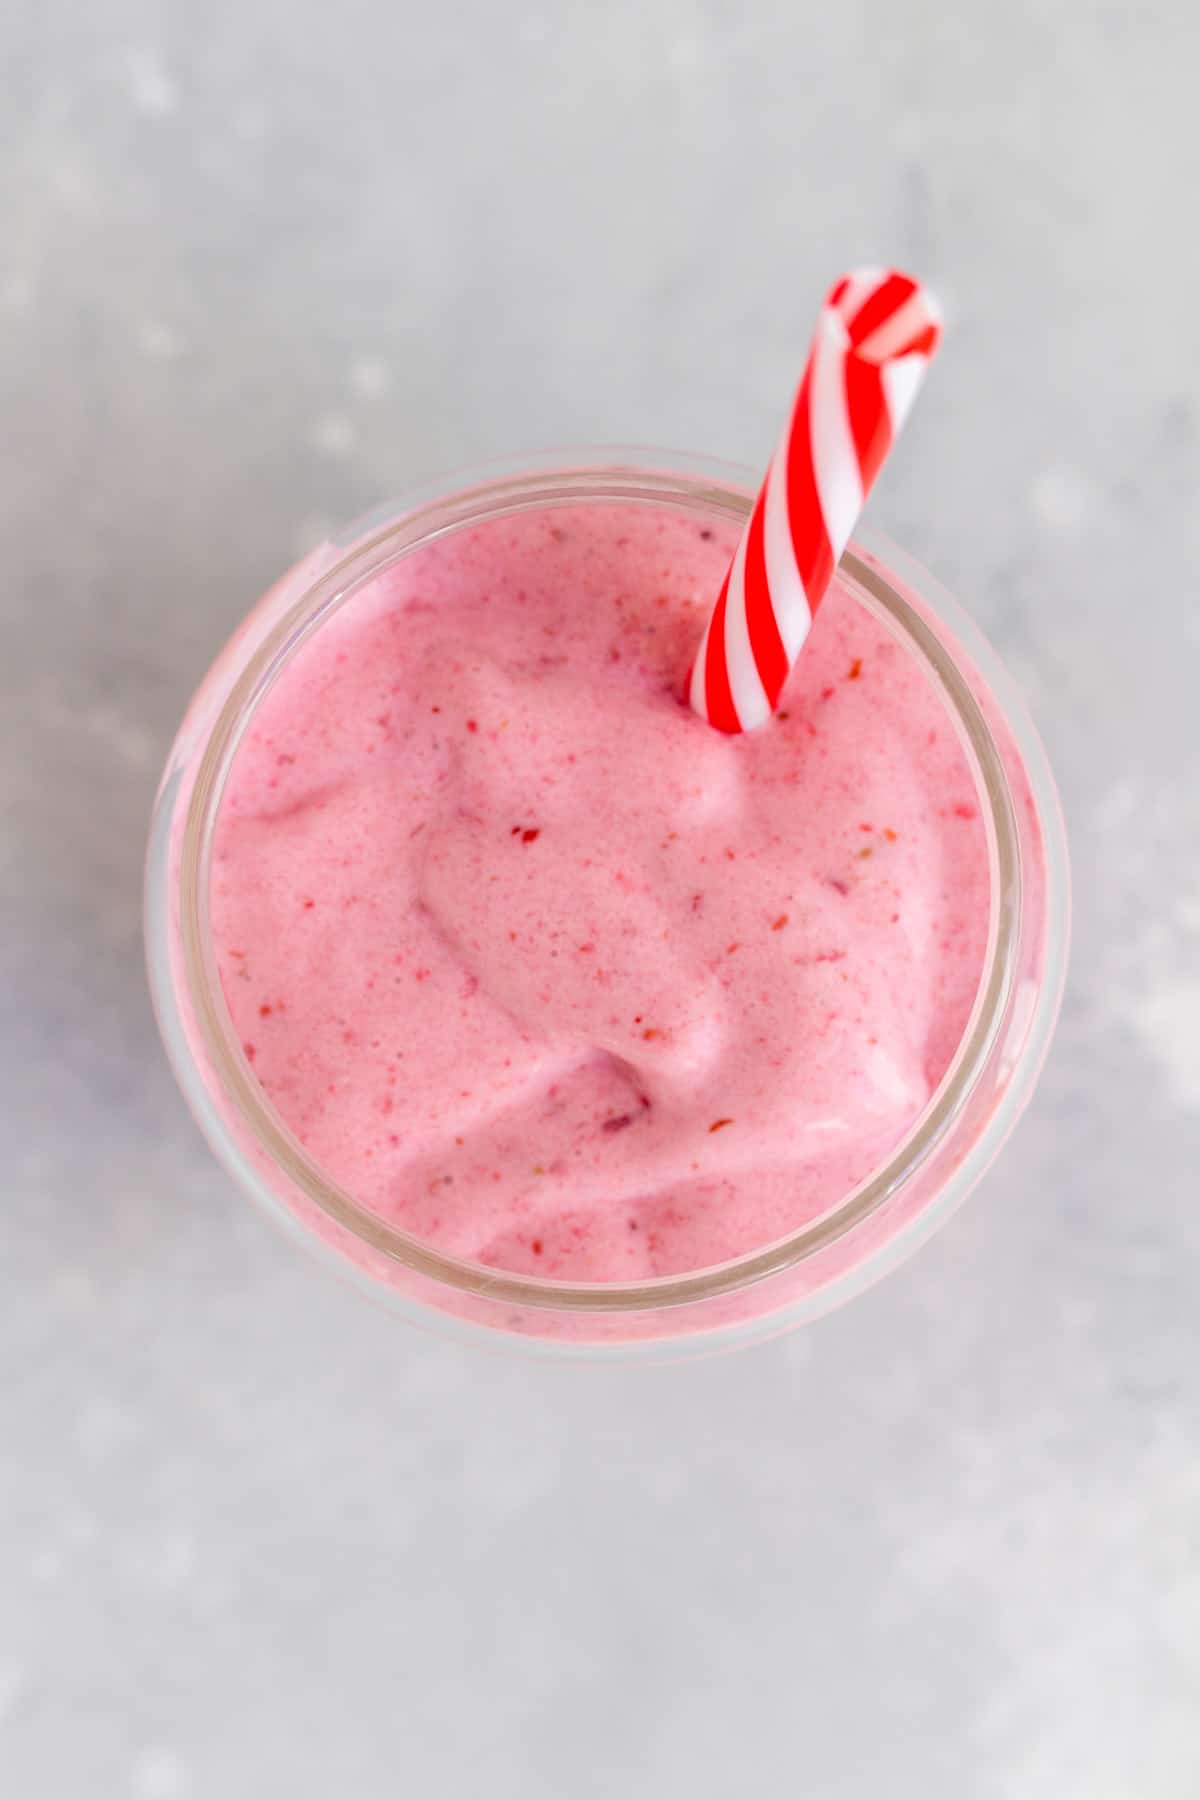 Overhead view of a glass of frozen fruit smoothie with a straw inside.